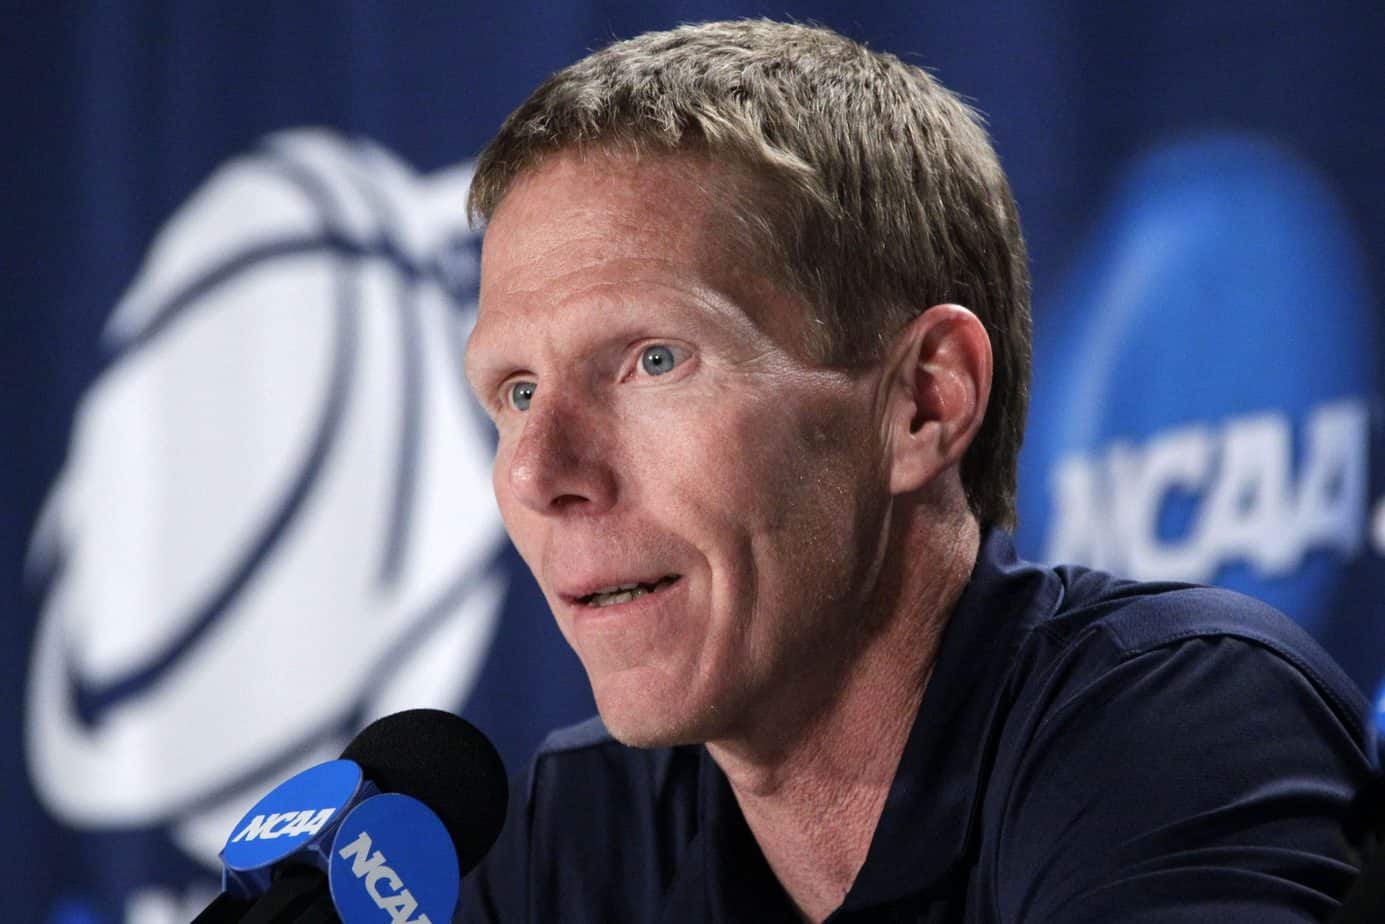 Social media was quick to pounce on an easy joke after it was revealed that Gonzaga coach Mark Few was cited for a DUI over the weekend